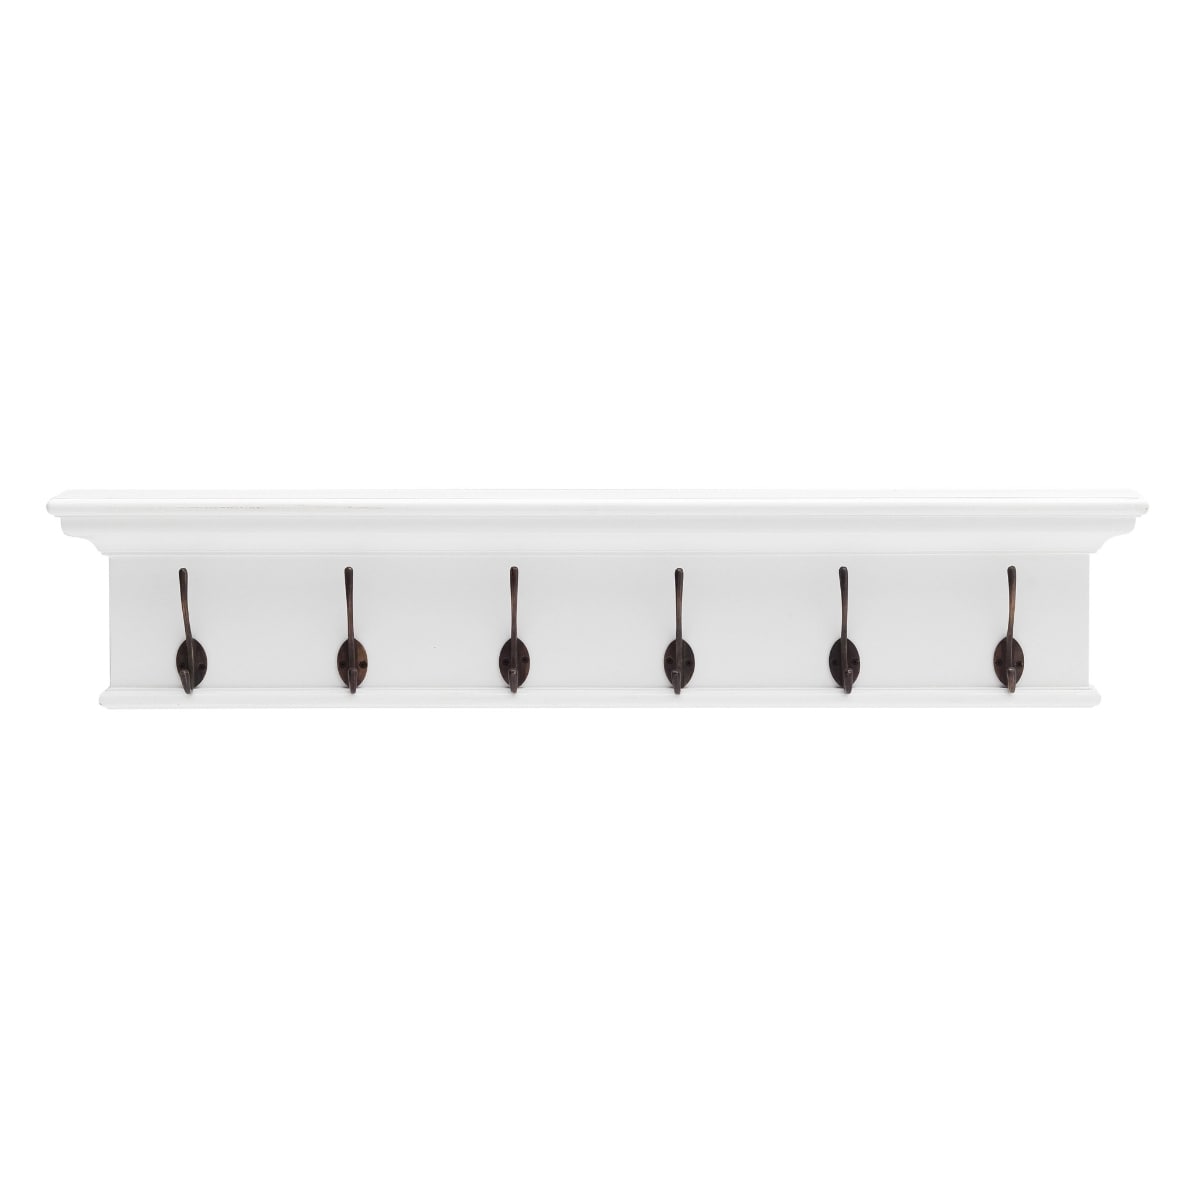 Cain 36 Wide Wooden Wall Mounted Coat Rack with 4 Hooks and Storage in Rustic Antique Finish Birch Lane Color: White